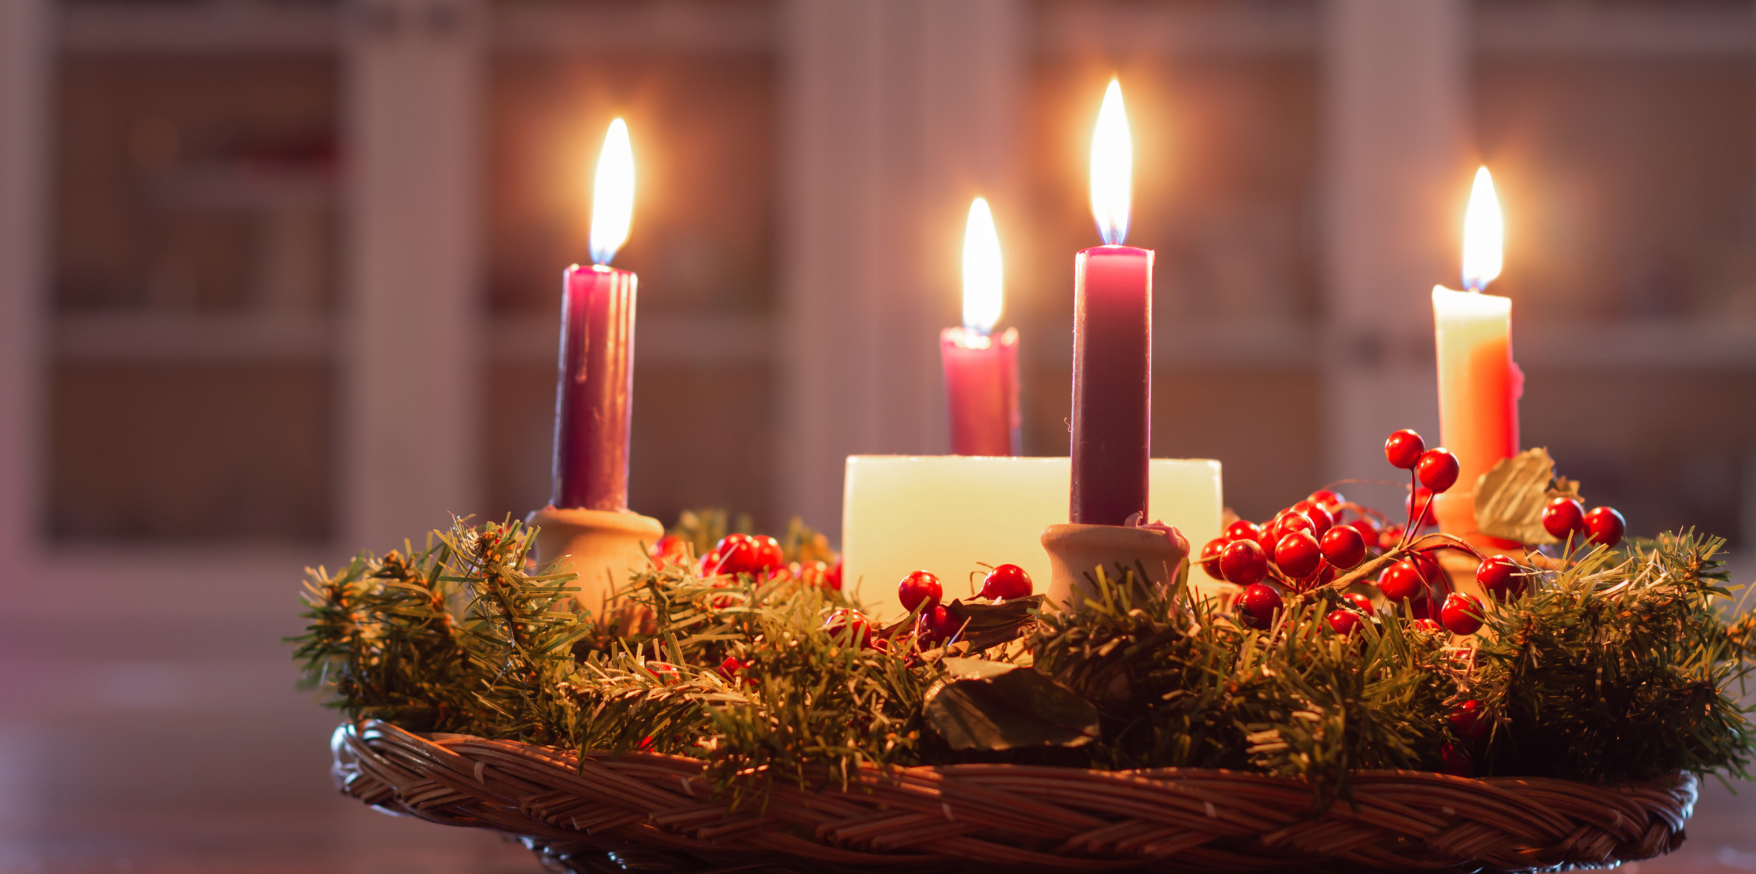 Advent wreath with 4 lit candles